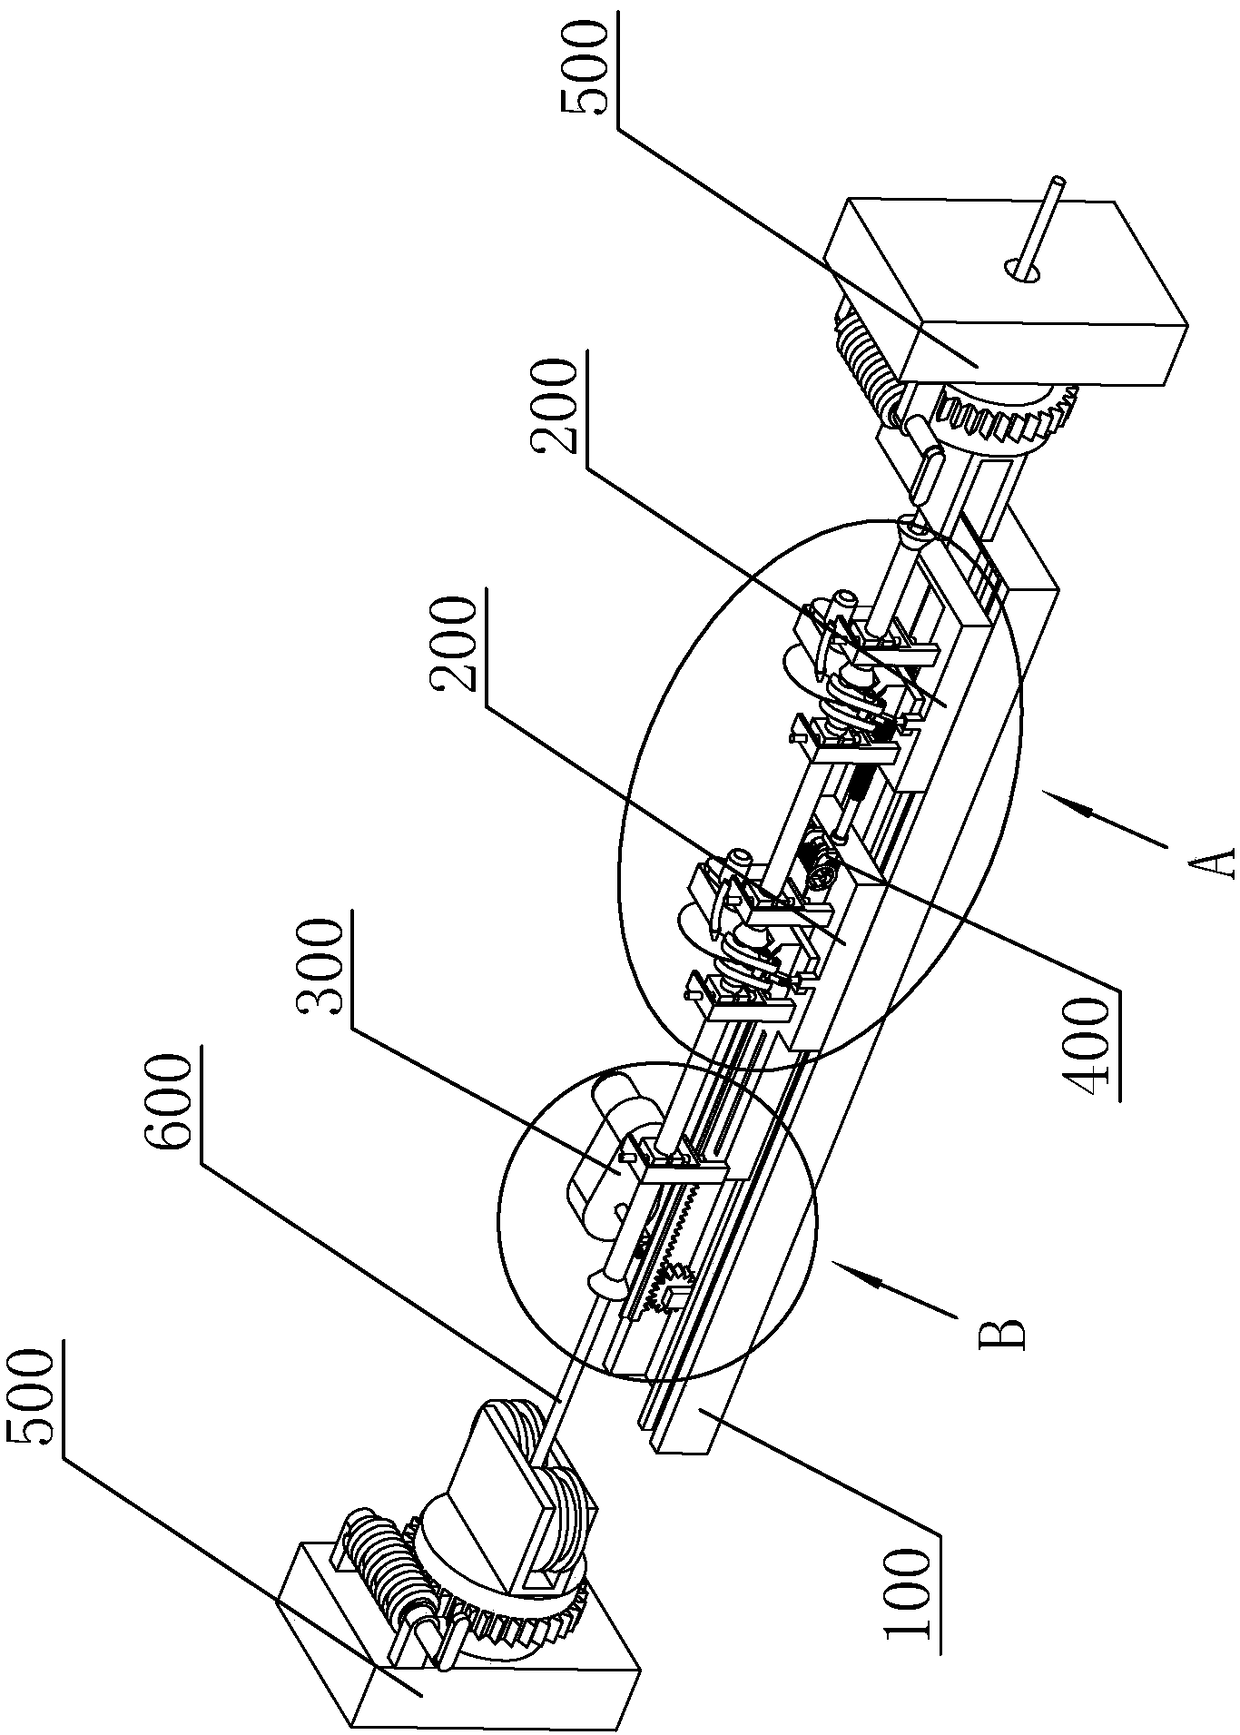 Using method for numerical control dual-flying-saw cold slitting machine